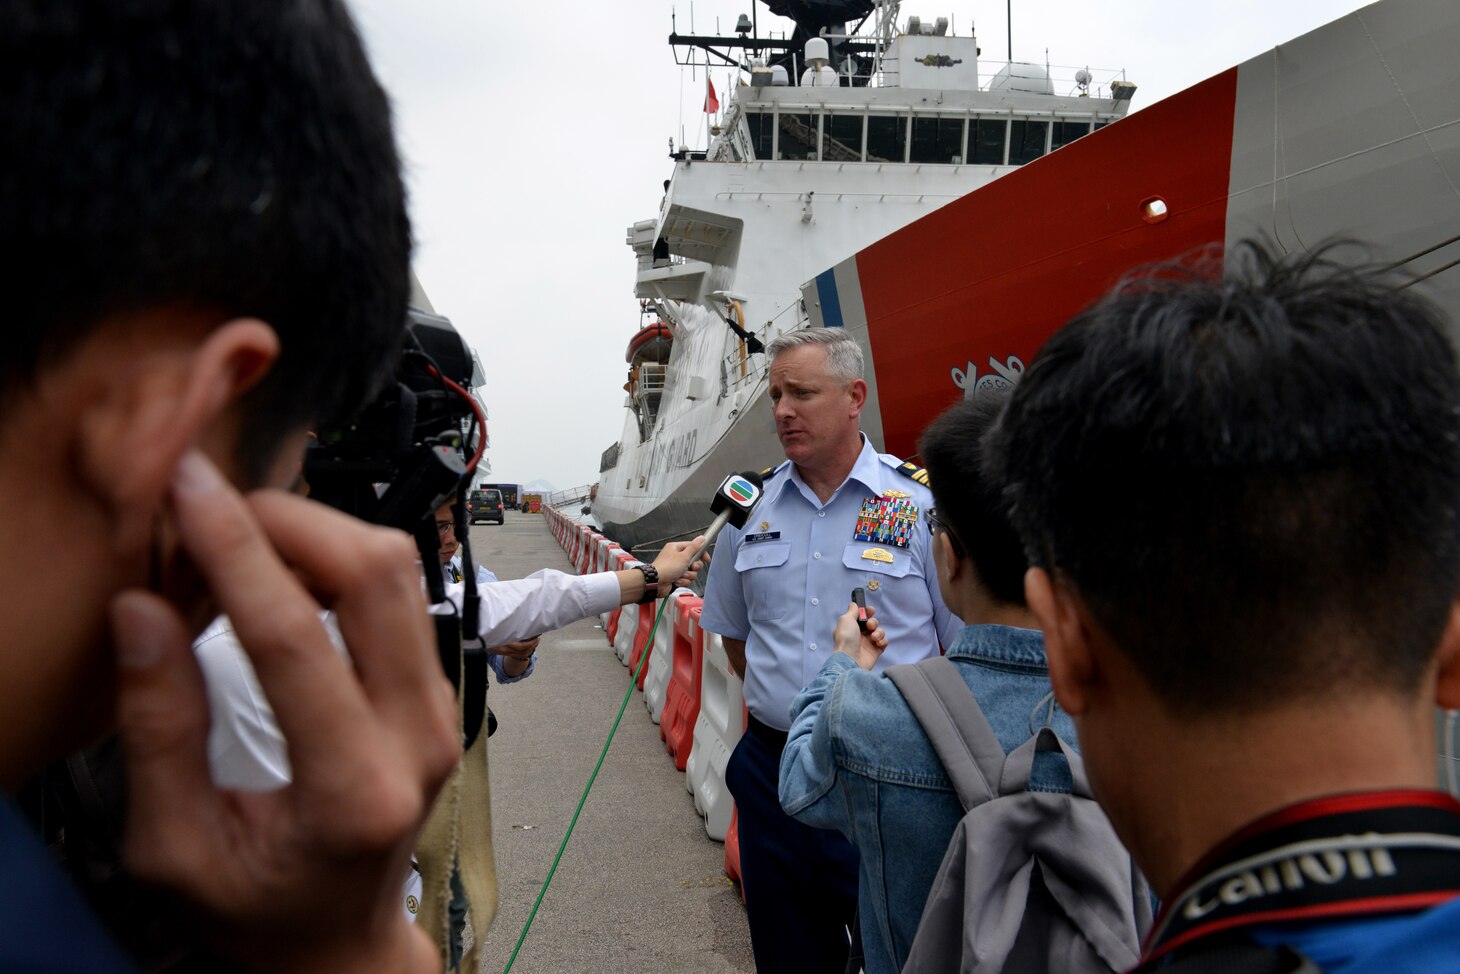 Capt. John D. Driscoll, commanding officer of the U.S. Coast Guard Cutter Bertholf (WMSL 750) speaks with members of the local and international media after the cutter moored in Hong Kong, April 15, 2019. The U.S. Coast Guard has deep and long-standing ties with our partners in the region, and more importantly, the service shares a strong commitment to a free and open Indo-Pacific, governed by a rules-based international system that promotes peace, security, prosperity, and sovereignty of all nations.